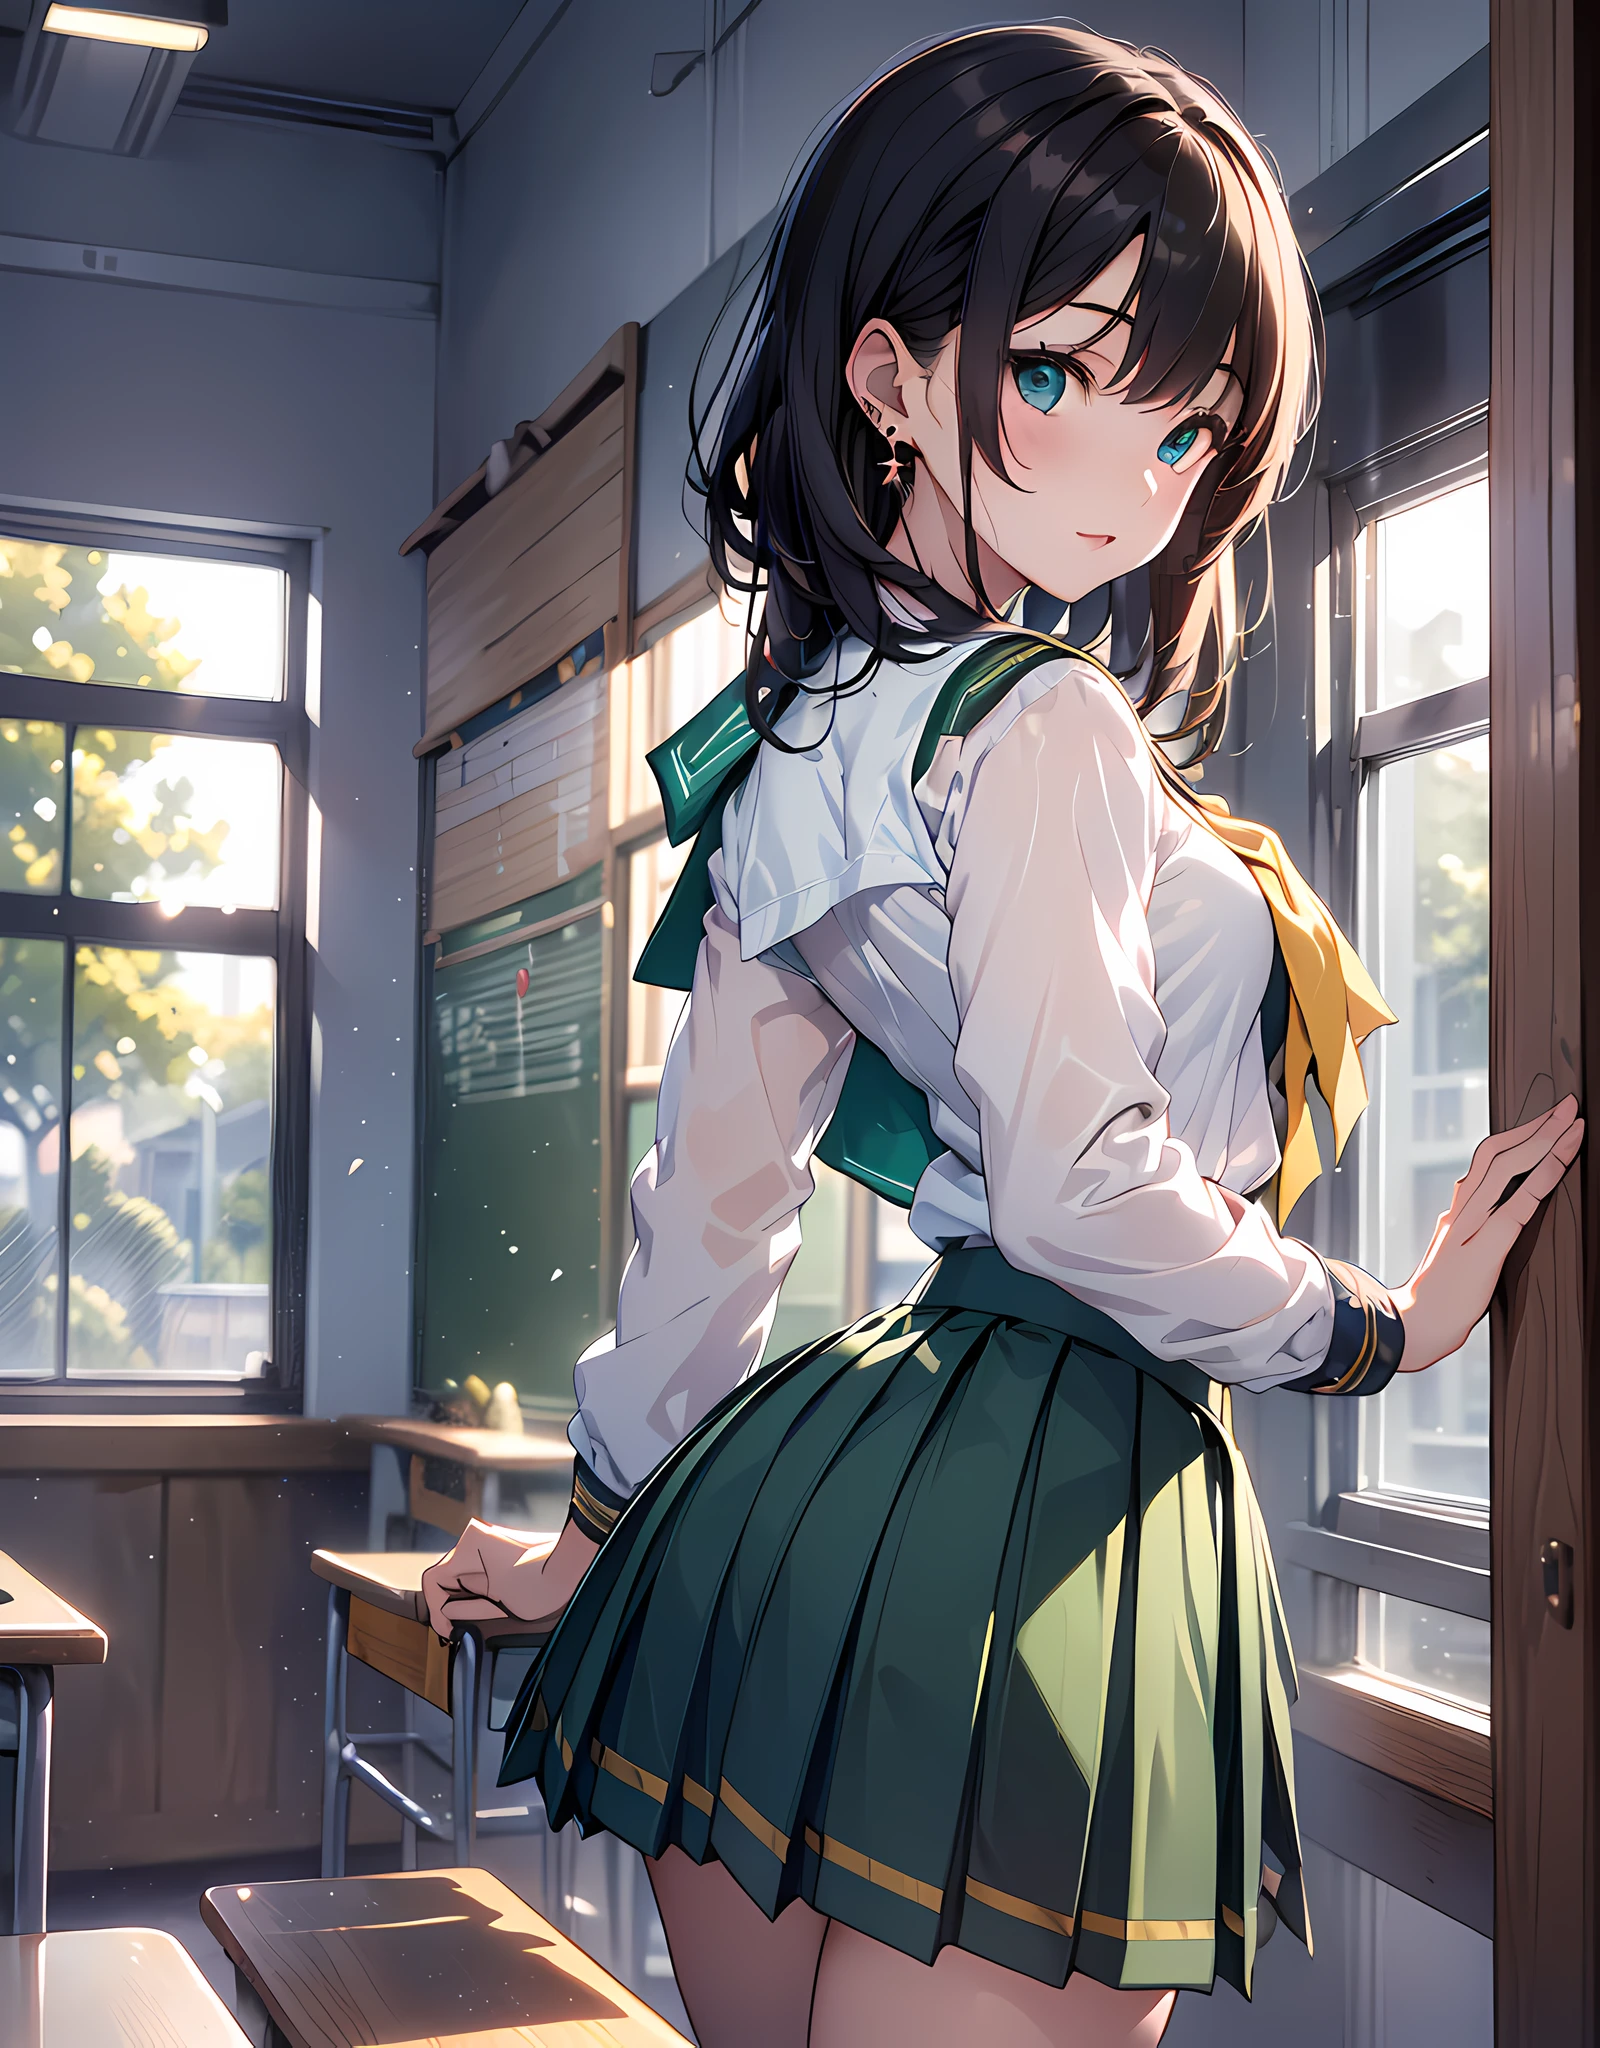 (masterpiece, best quality:1.37), highres, ultra-detailed, ultra-sharp, BREAK, Japanese school girl model, 1girl, (beautiful anime face, cute face, detailed face), (black hair, short hair, bangs), blue eyes, jewelry, earrings, piercing, BREAK, ((detailed school girl uniform:1.5), (detailed collard sailor shirt:1.3), (yellow tie:1.3), (dark-green pleats skirt:1.3), lovely look, detailed clothes), light smile, closed mouth, parted lips, pink lipstick, BREAK, standing, look back, from behind, cowboy shot, detailed human hands, HDTV:1.2, ((detailed school room background:1.3)), 8 life size, slender, anime style, anime style school girl, perfect anatomy, perfect proportion, inspiration from Kyoto animation and A-1 picture, late evening, excellent lighting, bright colors, clean lines, photorealistic